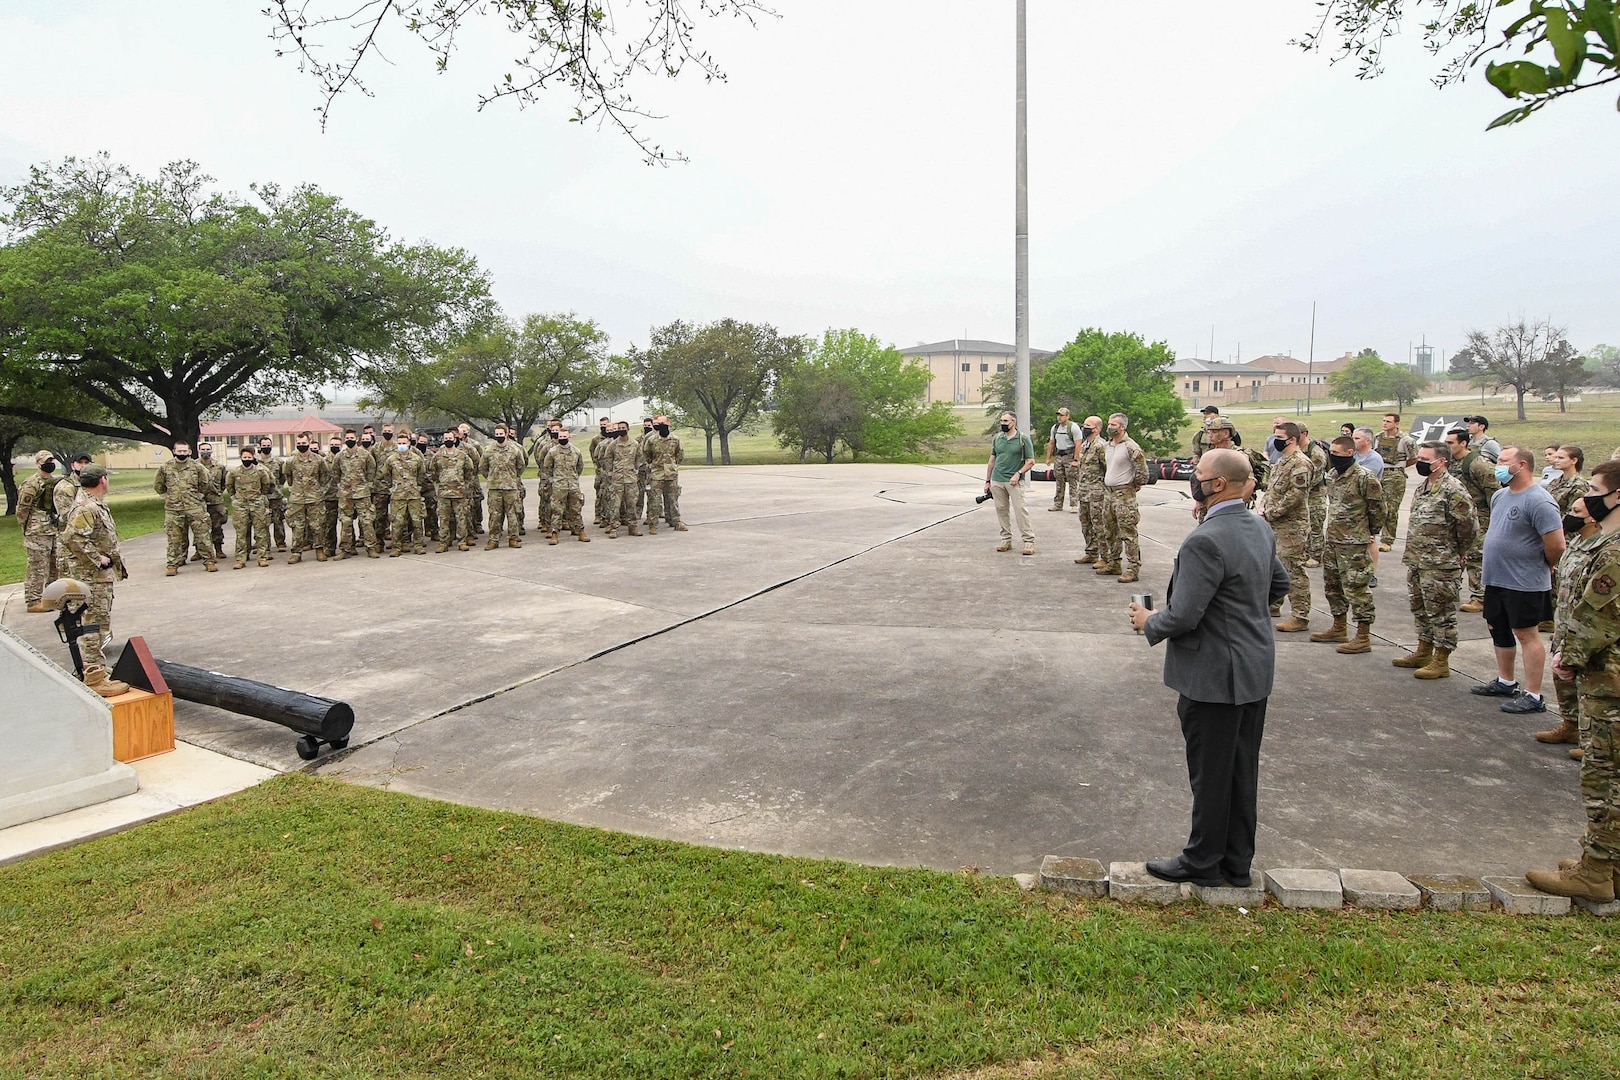 JOINT BASE SAN ANTONIO-CHAPMAN TRAINING ANNEX, Texas—Chief Master Sgt. Todd M. Popovic, Special Warfare Training Wing, or SWTW, command chief, leads a formation in memorial pushups after a memorial log carry for fallen airman, Lt. Col. William Schroeder, at the SWTW located on Joint Base San Antonio-Chapman Training Annex, or JBSA-CTA, Apr. 8, 2021.